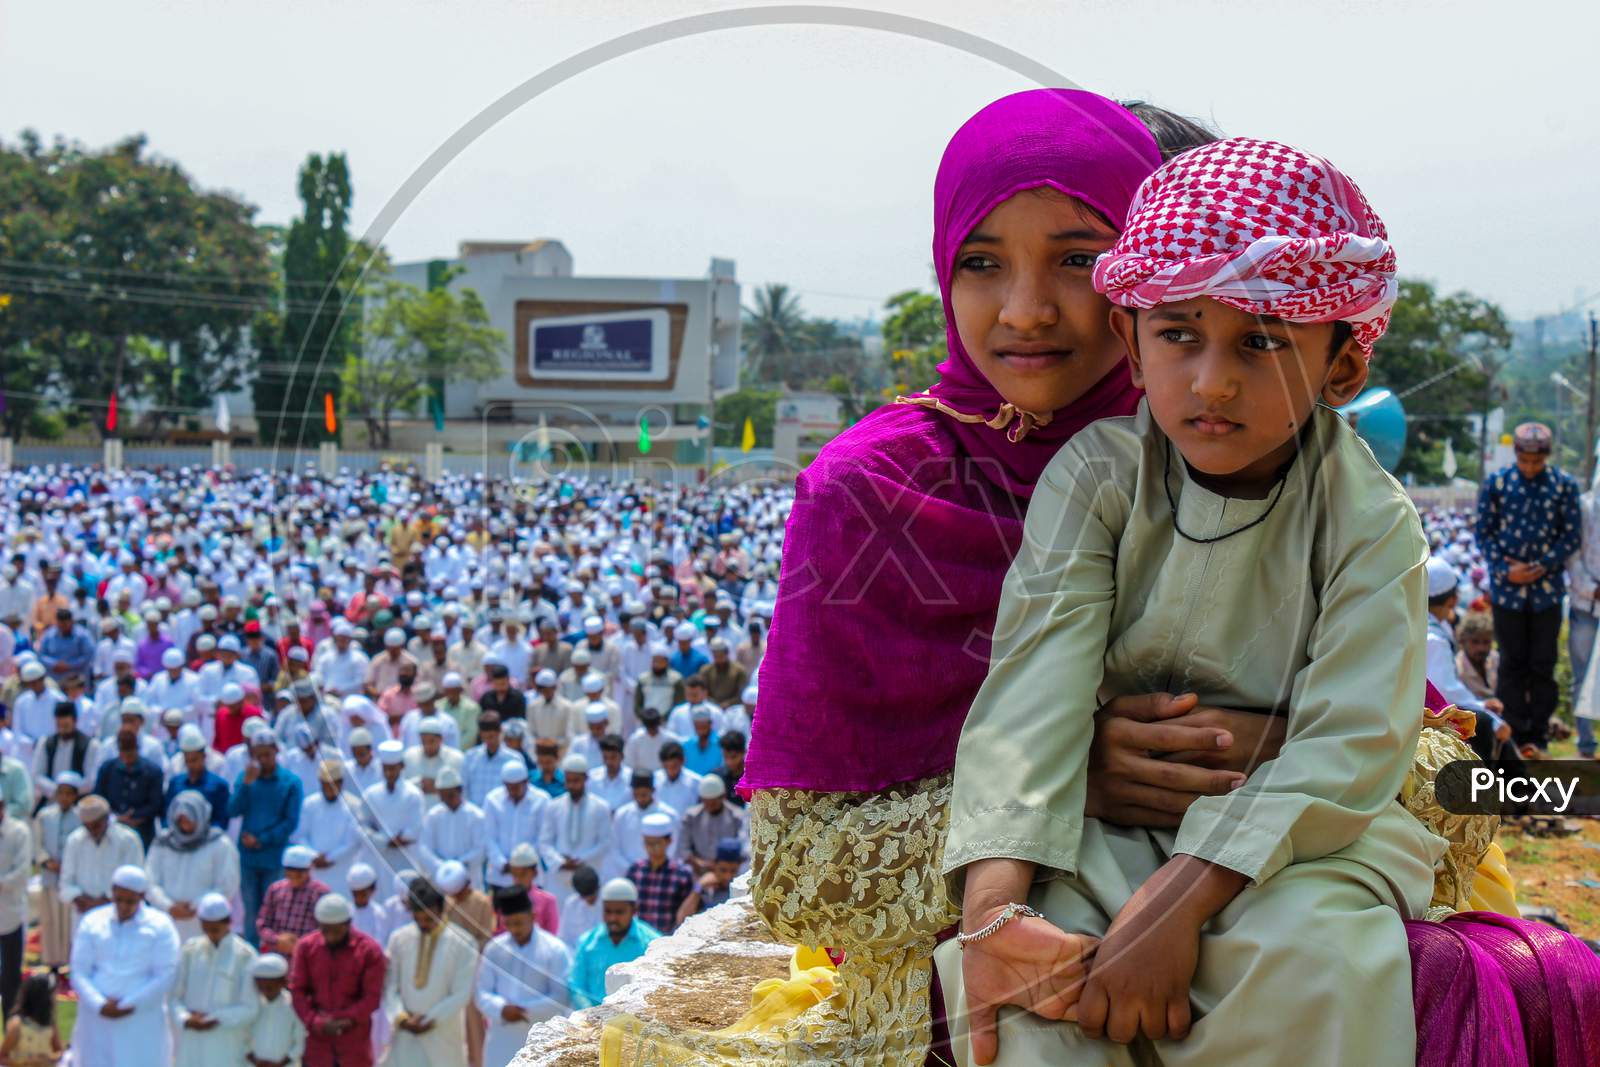 A Sister and her brother sitting at a Ramadan gathering in Mysore/Karnataka/India.